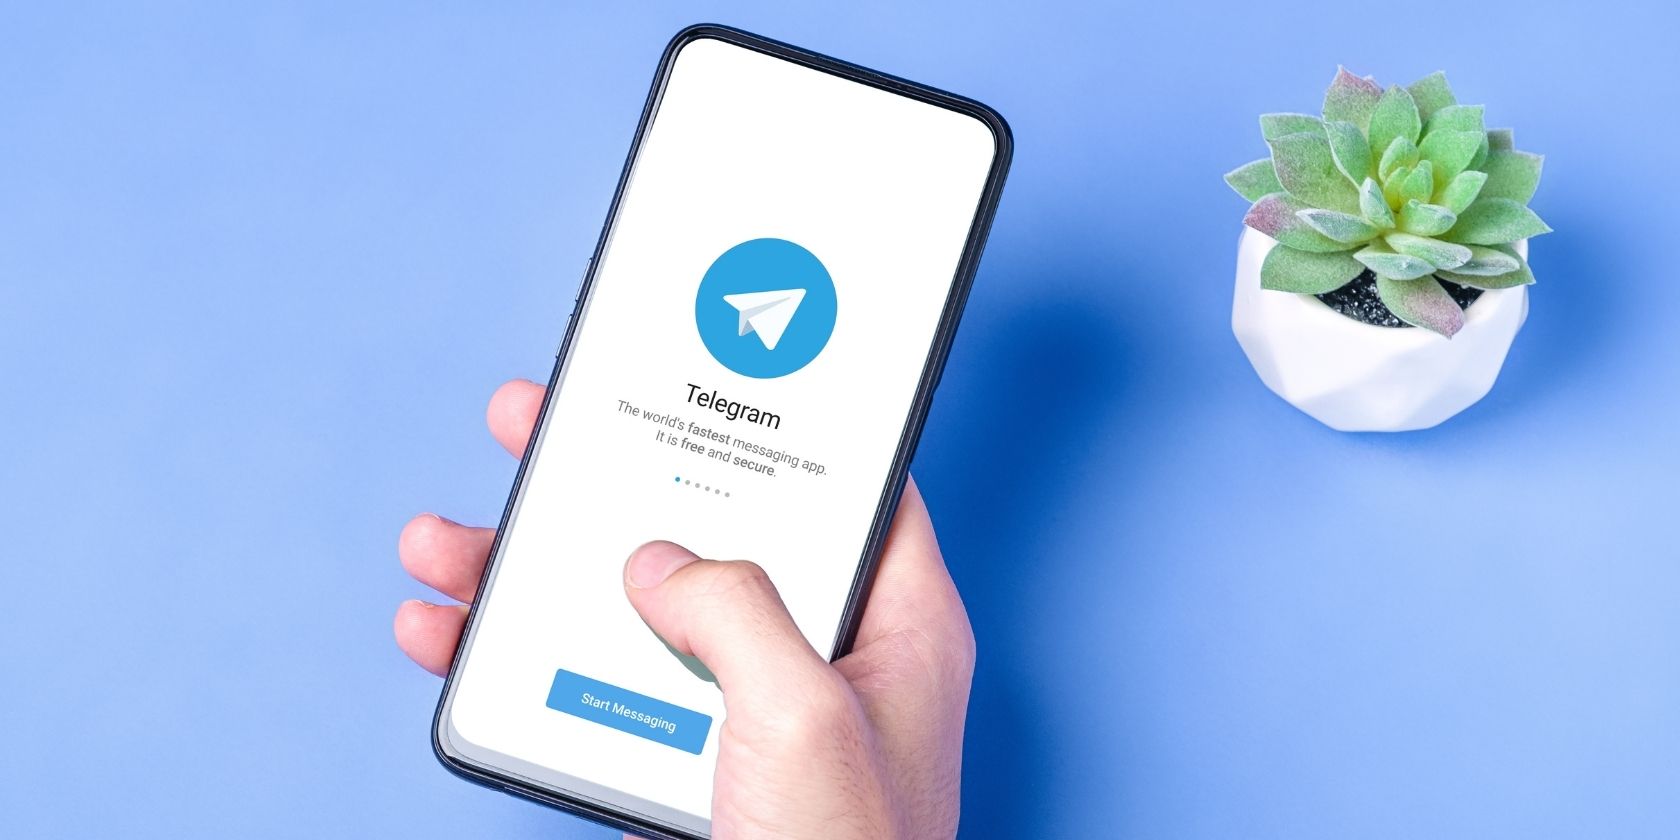 Telegram being used on a smartphone